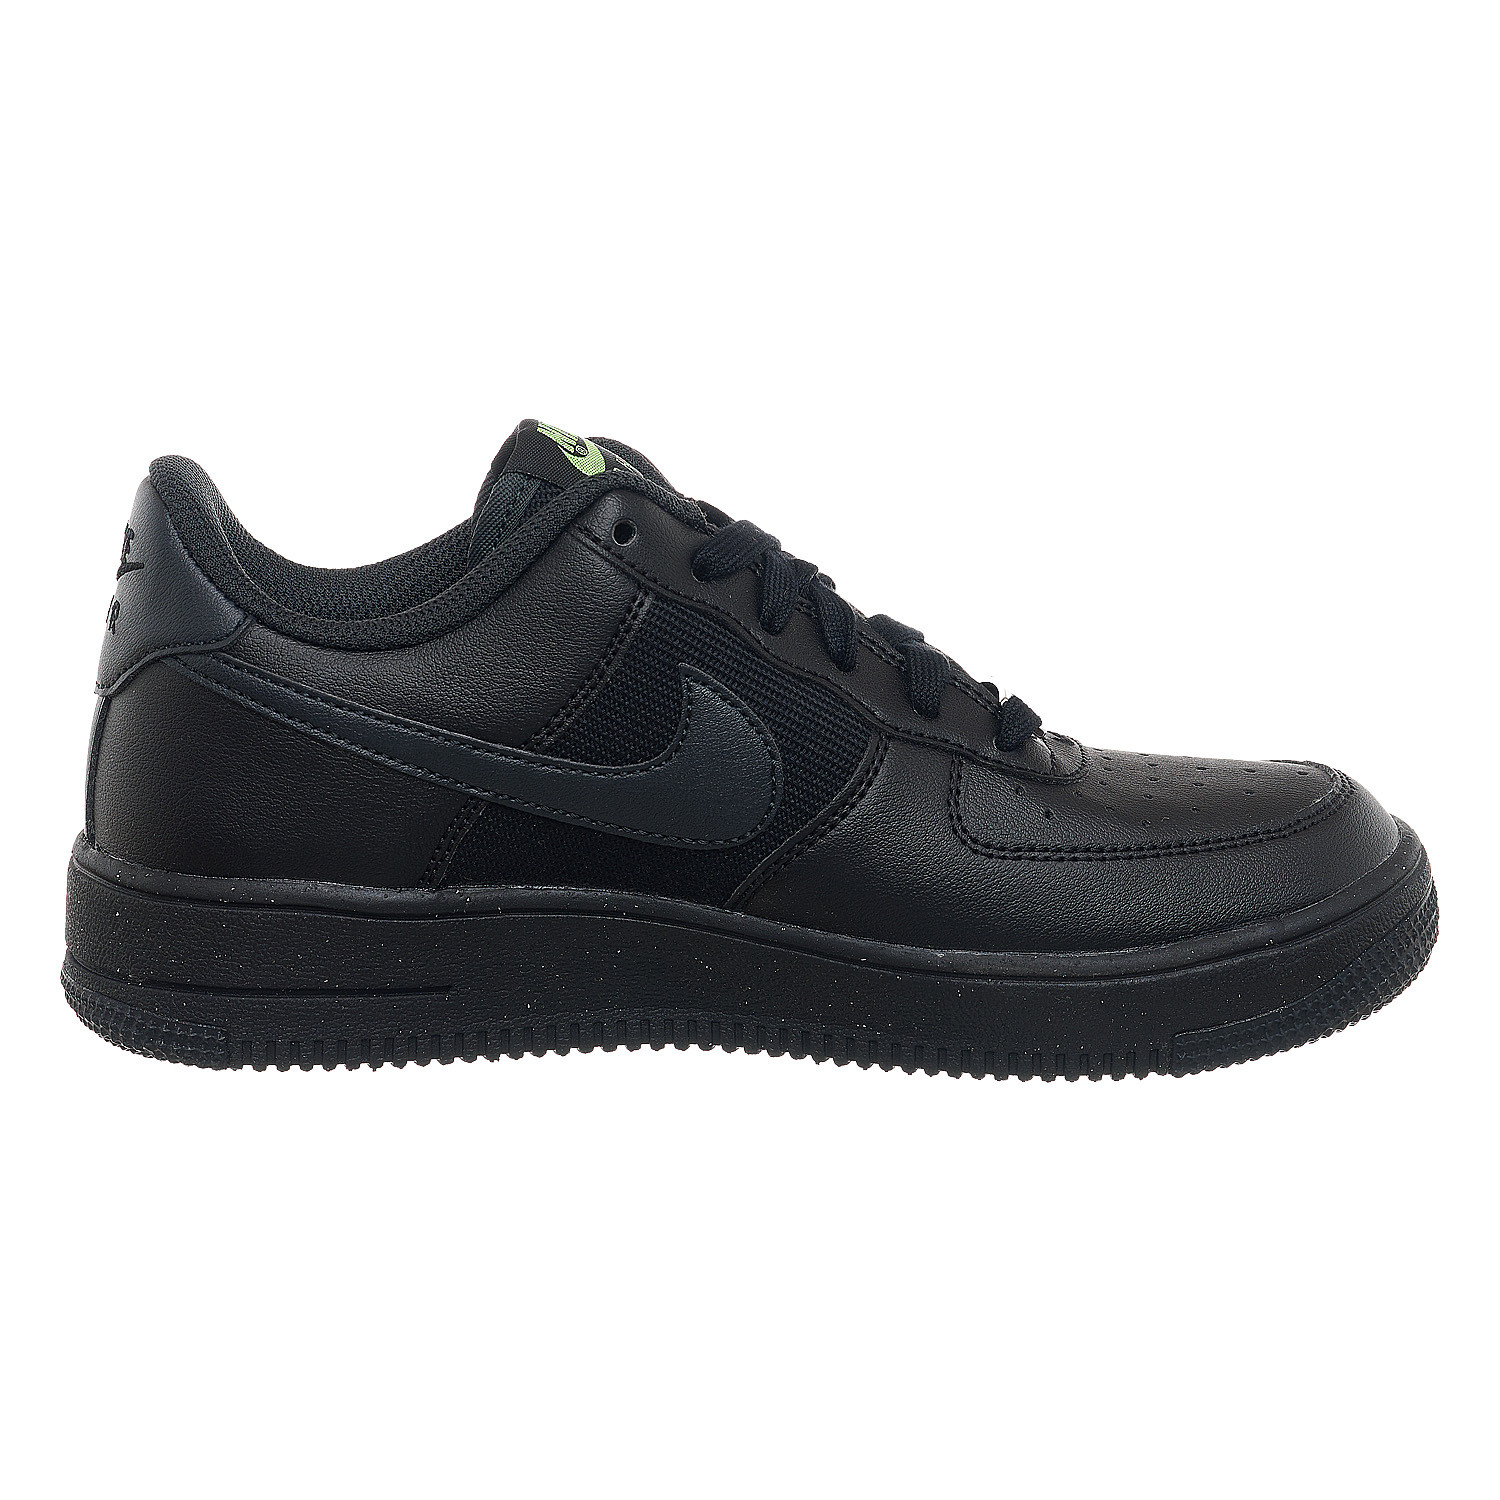 Кросівки Nike Ir Force 1 Low Crater Gs Triple Black (DH8695-001) DH8695-001